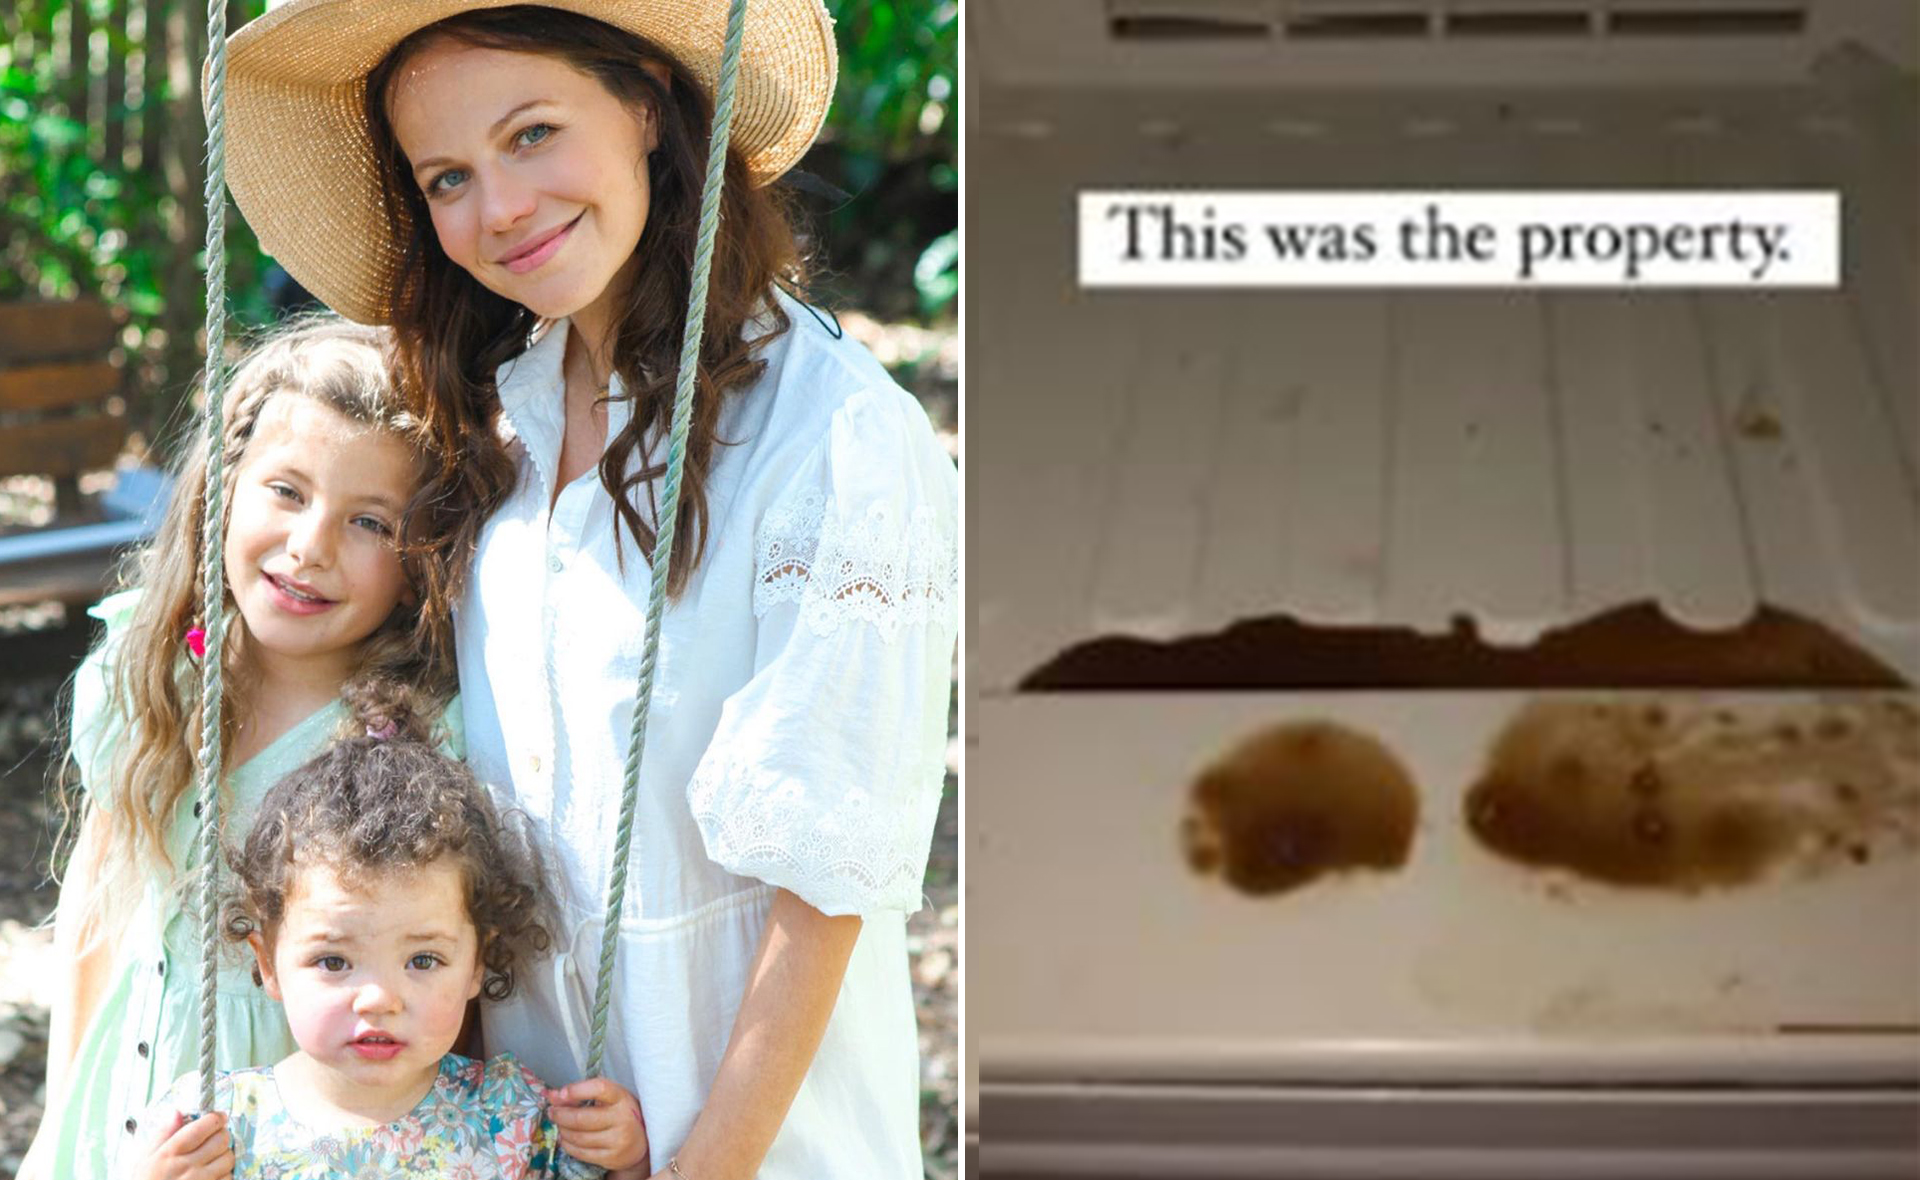 Inside Home and Away alum Tammin Sursok’s disastrous Airbnb ordeal: “What a s–t show”